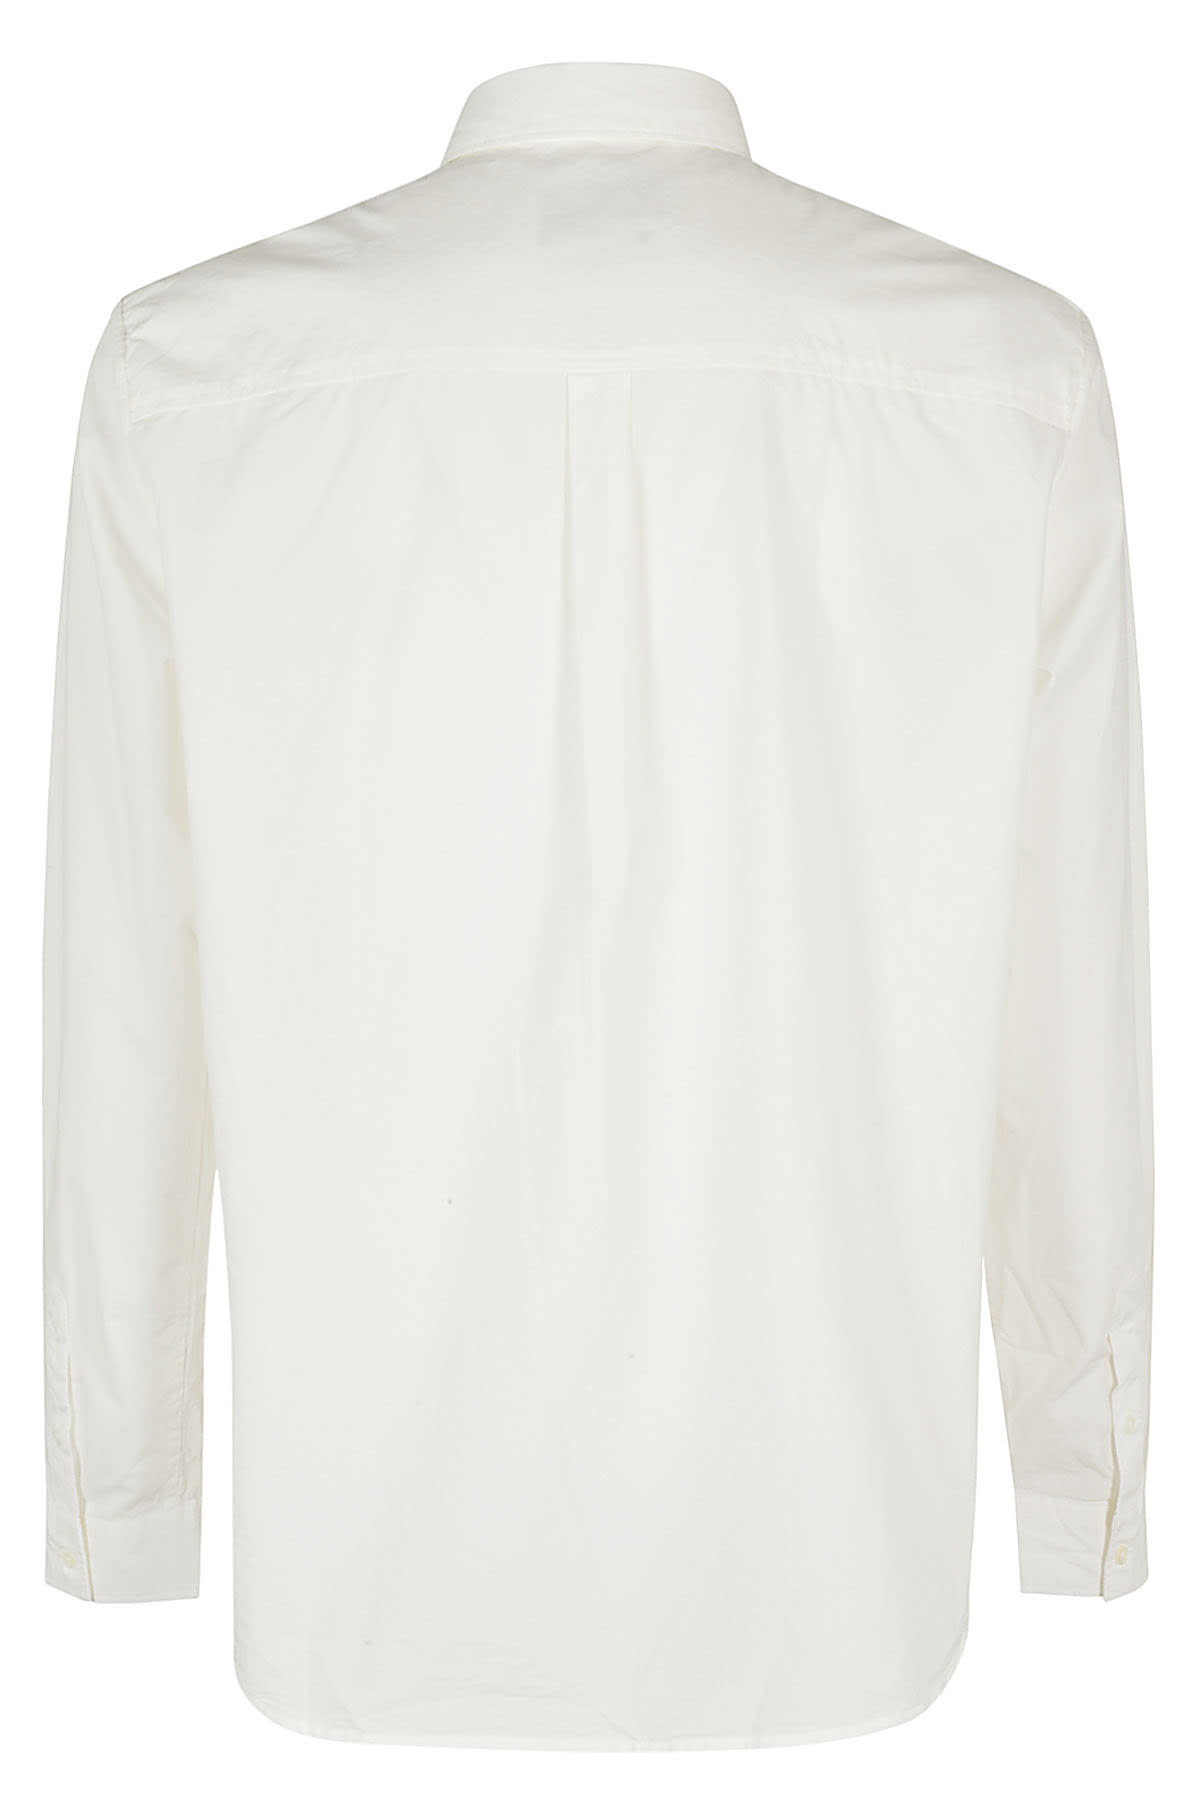 Shop Apc Chemise Clement In Aab White